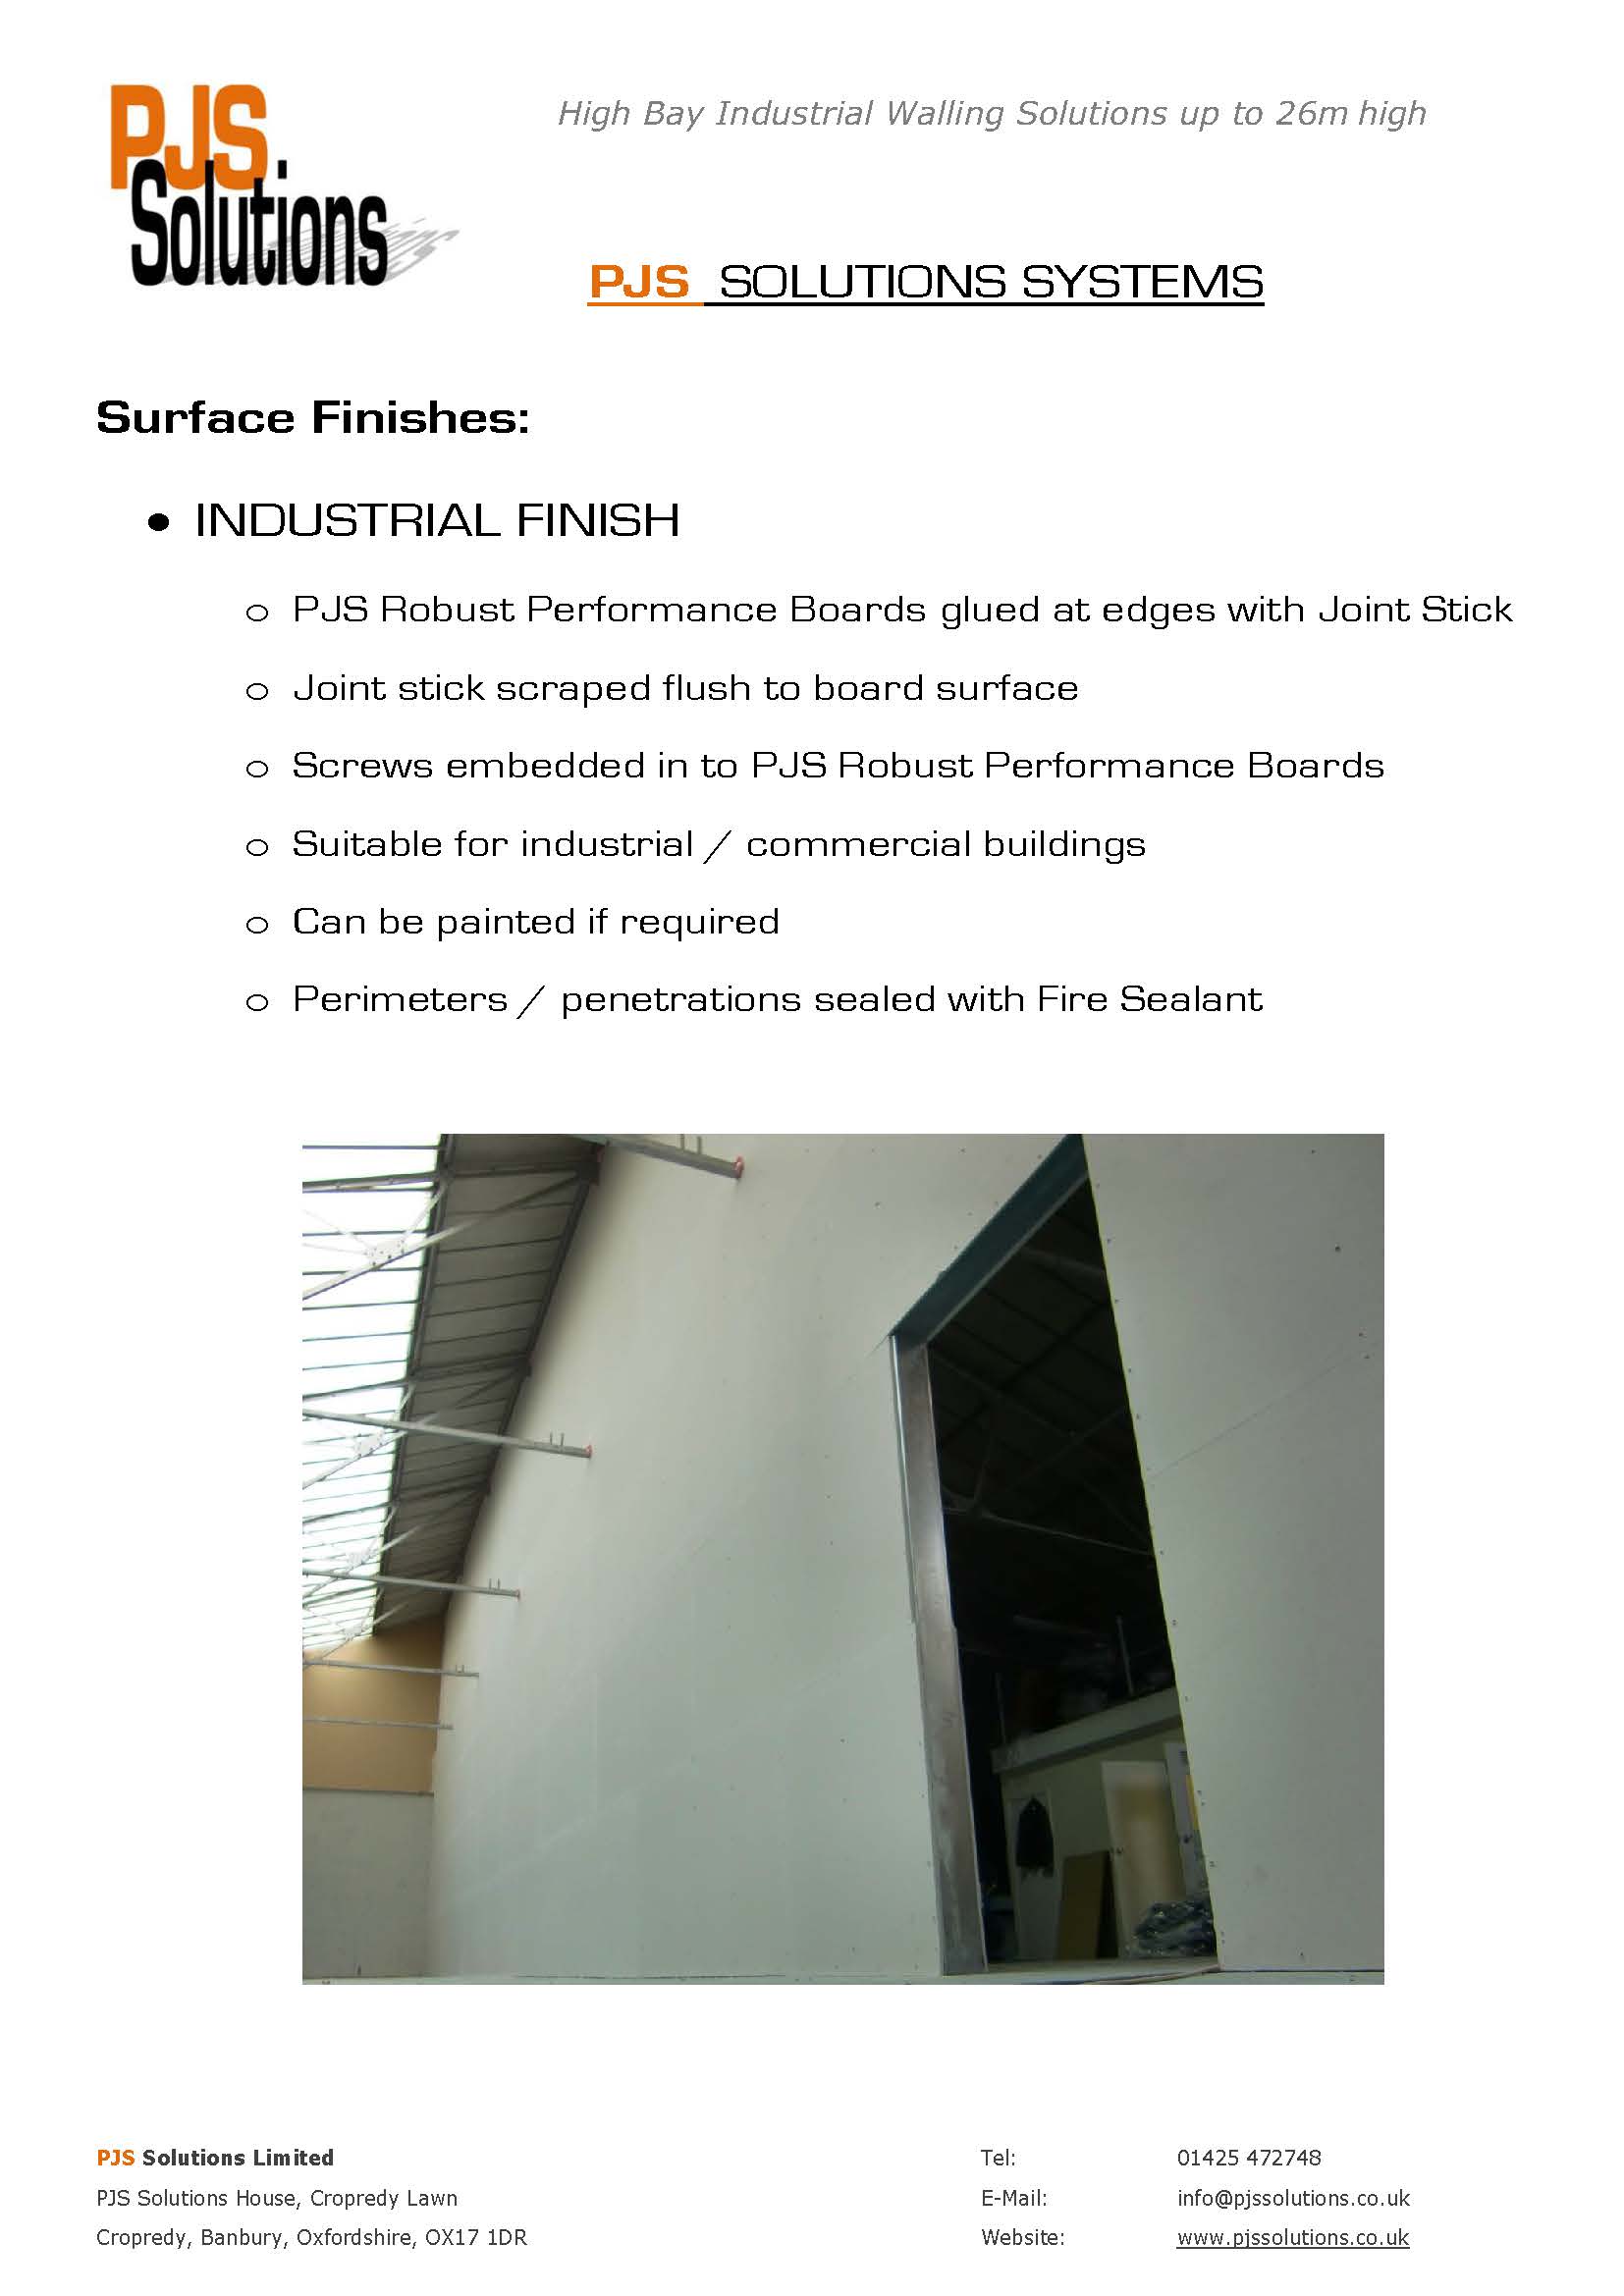 PJS SOLUTIONS PARTITION SYSTEMS INDUSTRIAL FINISH